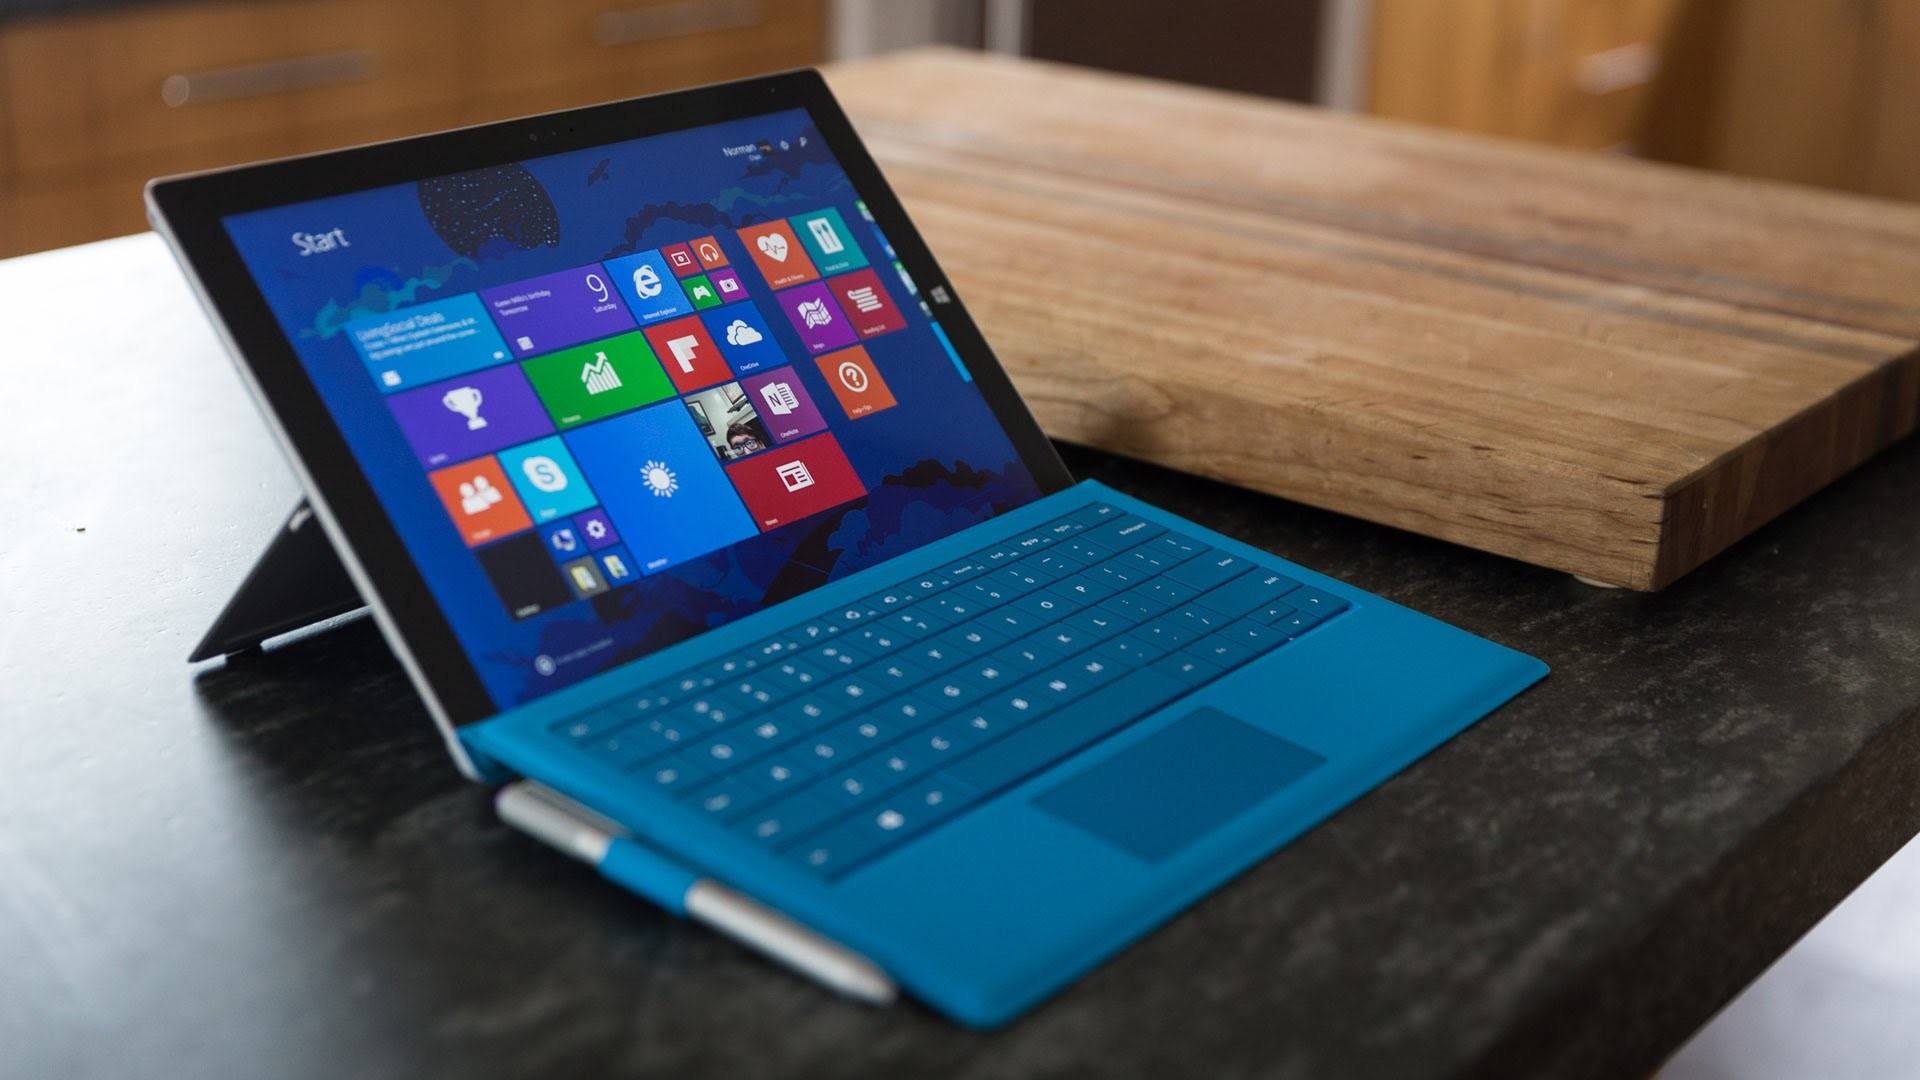 Apple iPad Pro vs. Microsoft Surface Pro 4: Which 2-in-1 device to get? - TechSpot